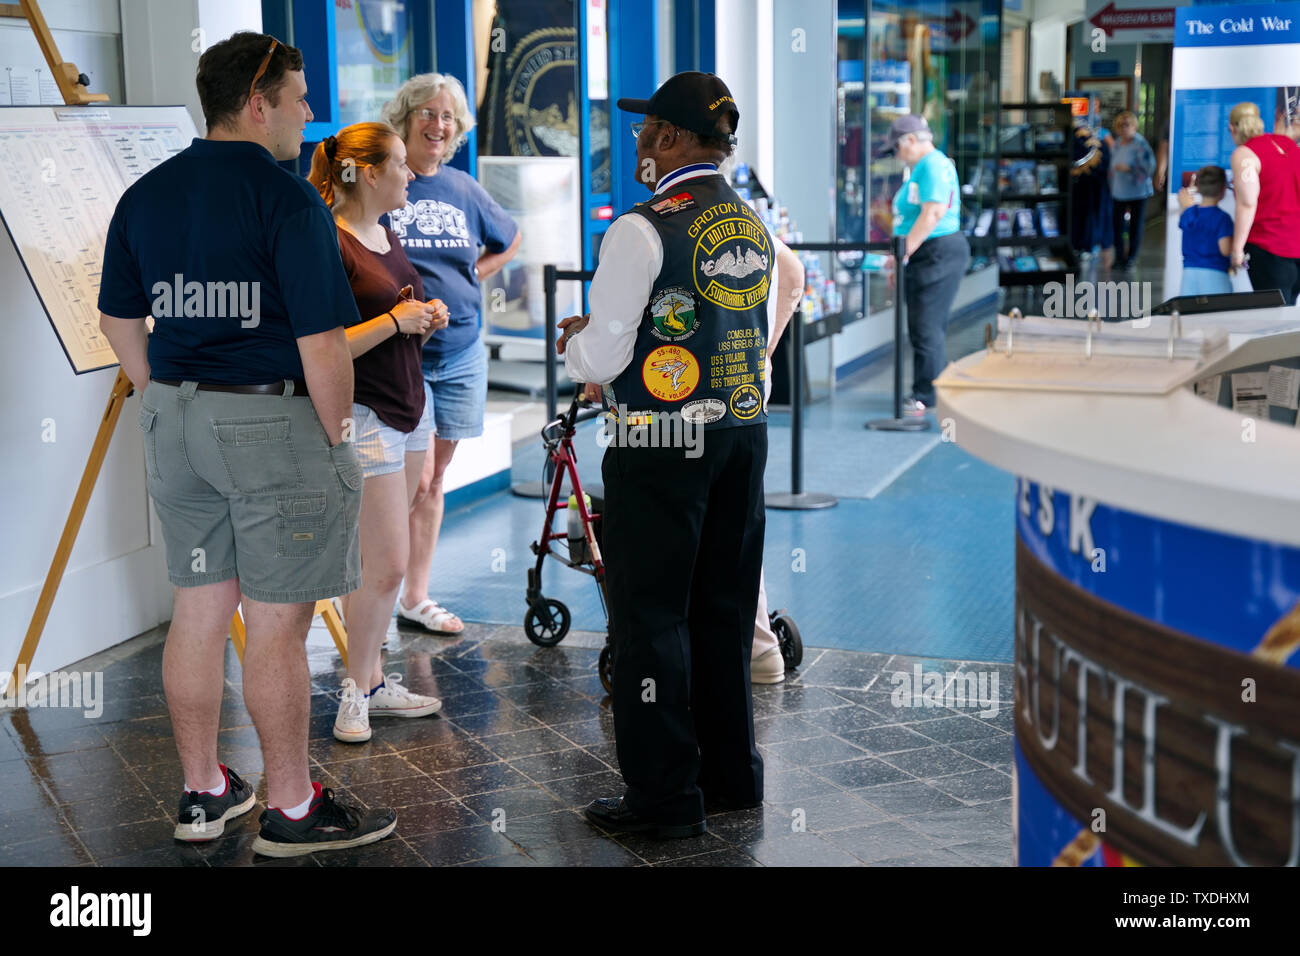 Submarine Force Museum, Groton CT USA, Jun 2019. Focused decorated vest on this proud African American veteran welcoming visitors young and old. Stock Photo